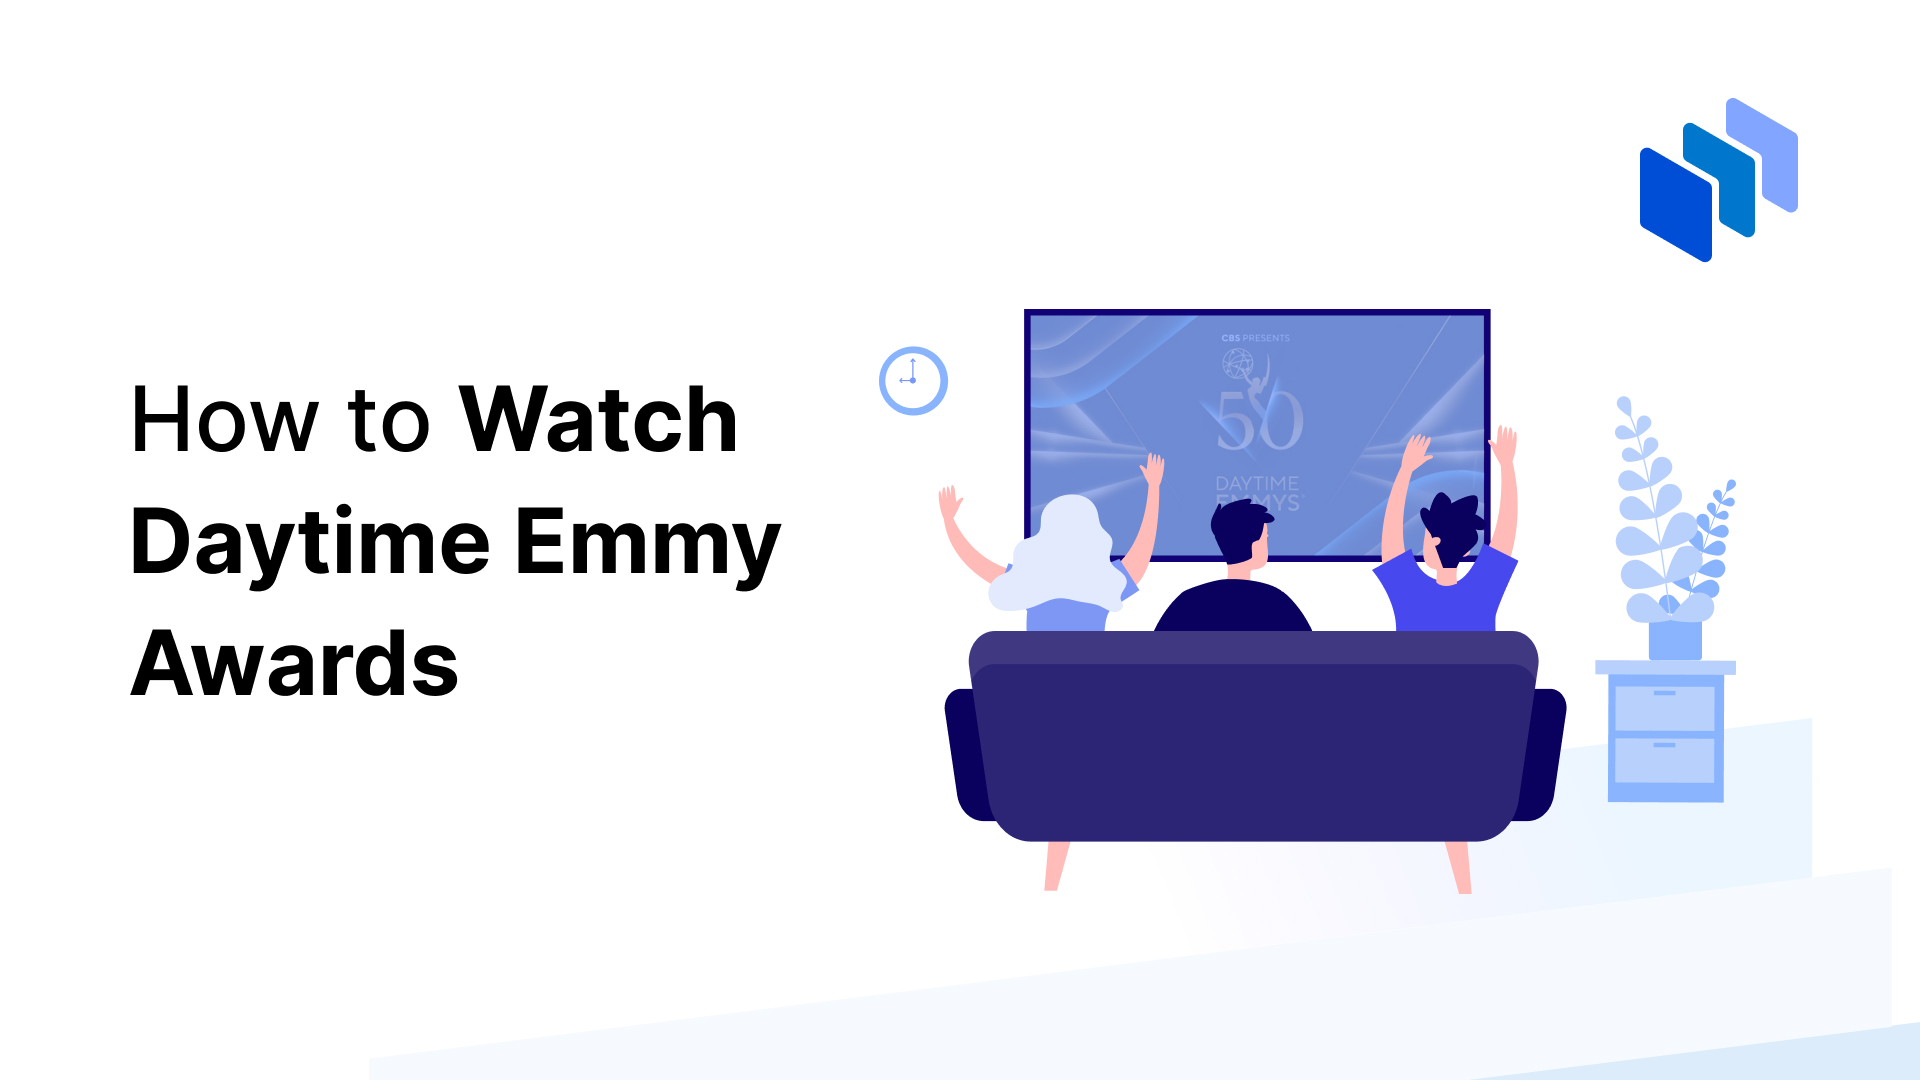 How to watch the Daytime Emmy Awards